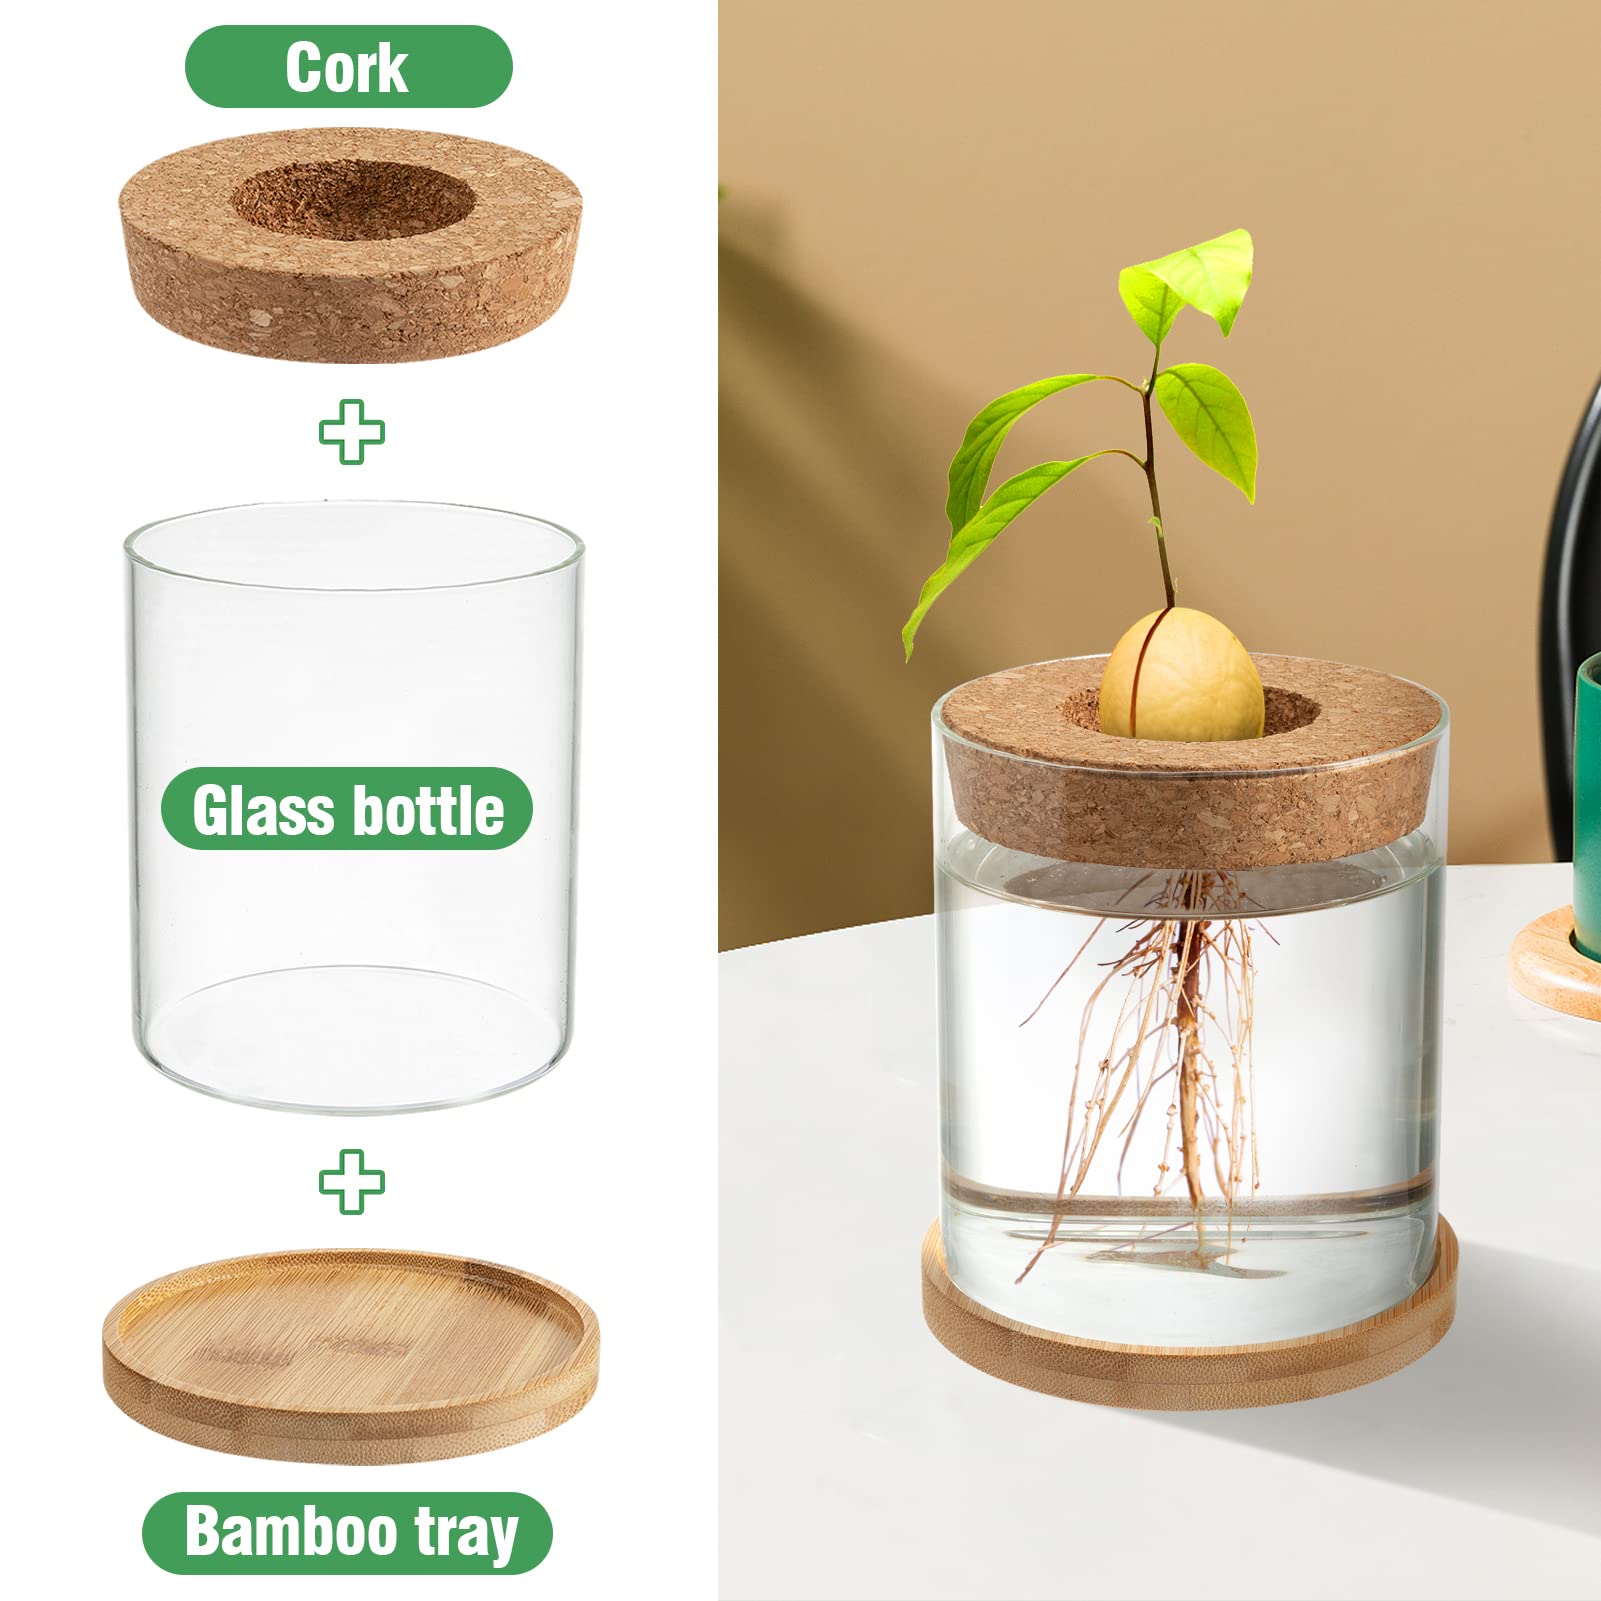 Biggun Avocado Tree Growing Kit - Avocado Pit Planting Bowl with Cork and Wooden Base, Cultivating Seedlings in Novel Way, Great Gift for Family Friends and Gardening Enthusiasts